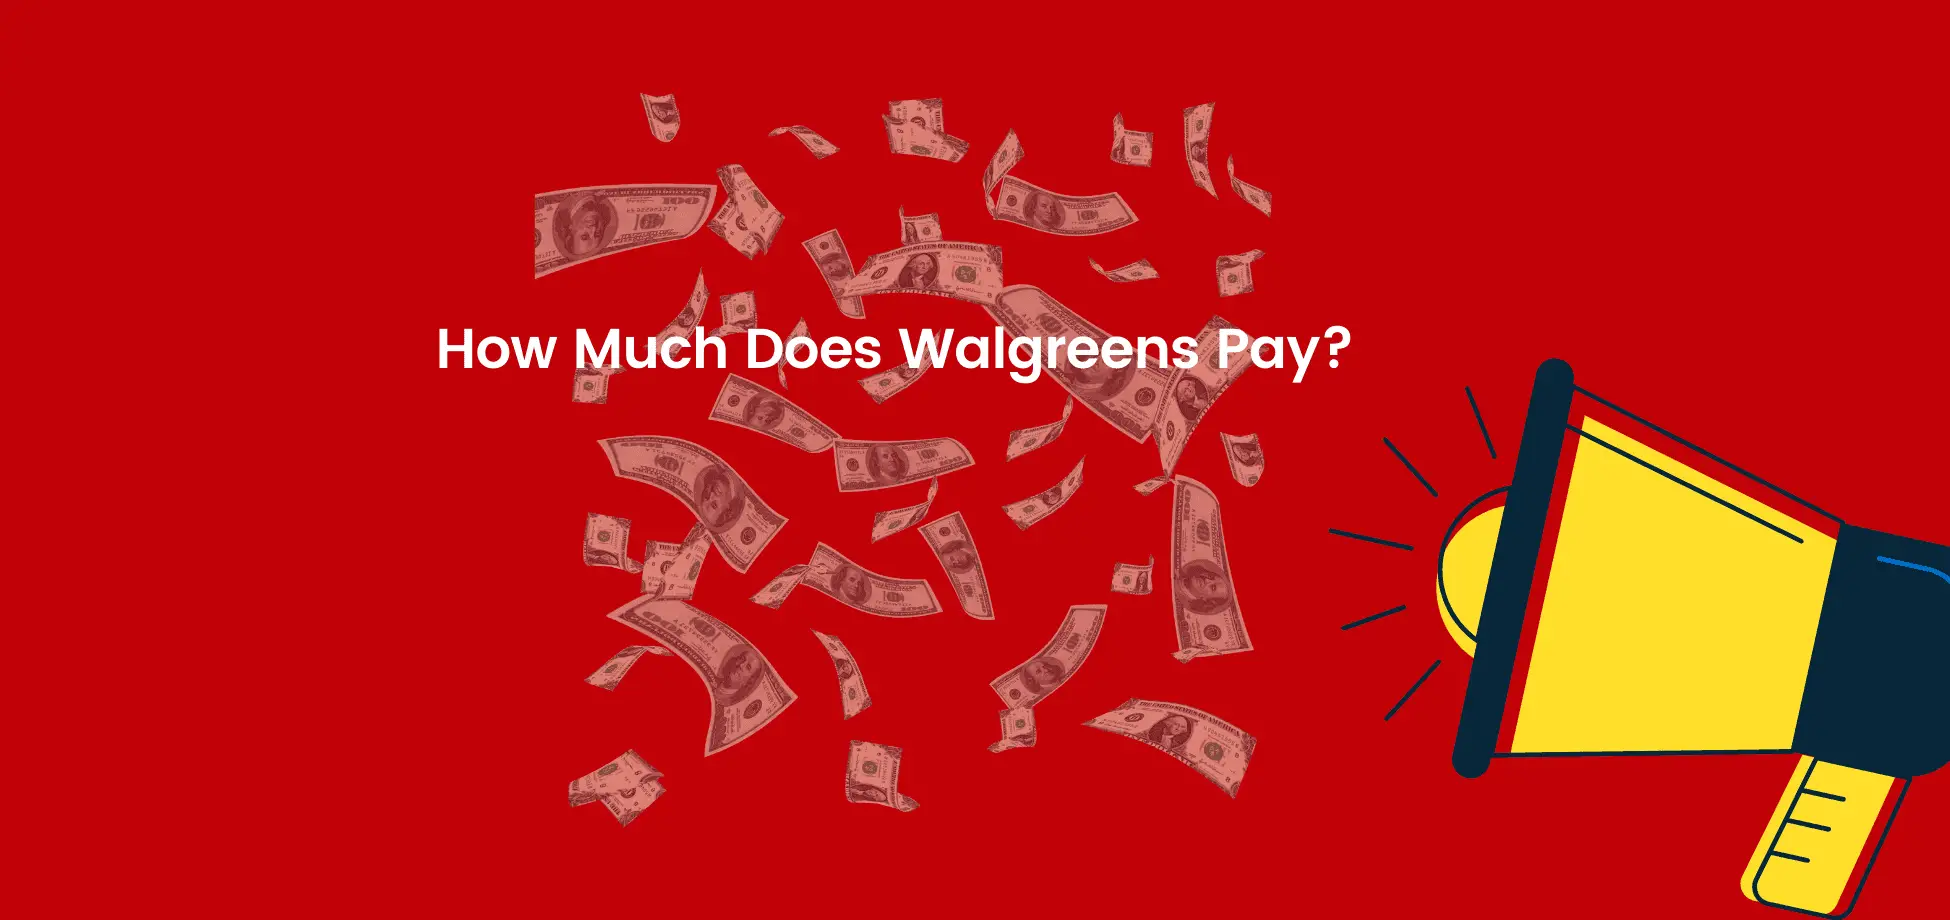 Walgreens salaries can use a dose of more competitiveness within the retail industry.